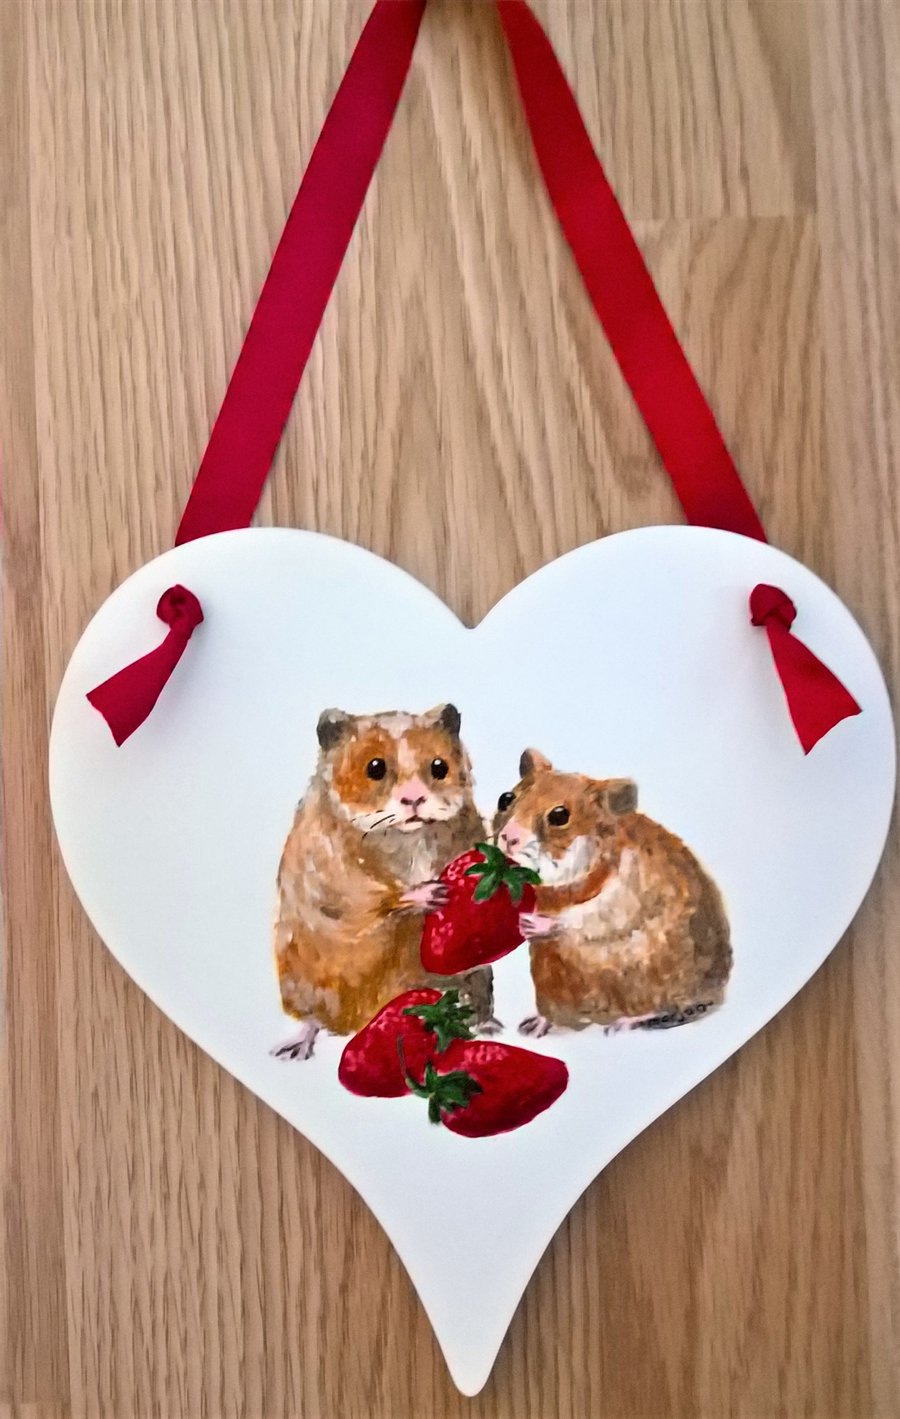 Valentine Heart and hamsters with strawberries painting